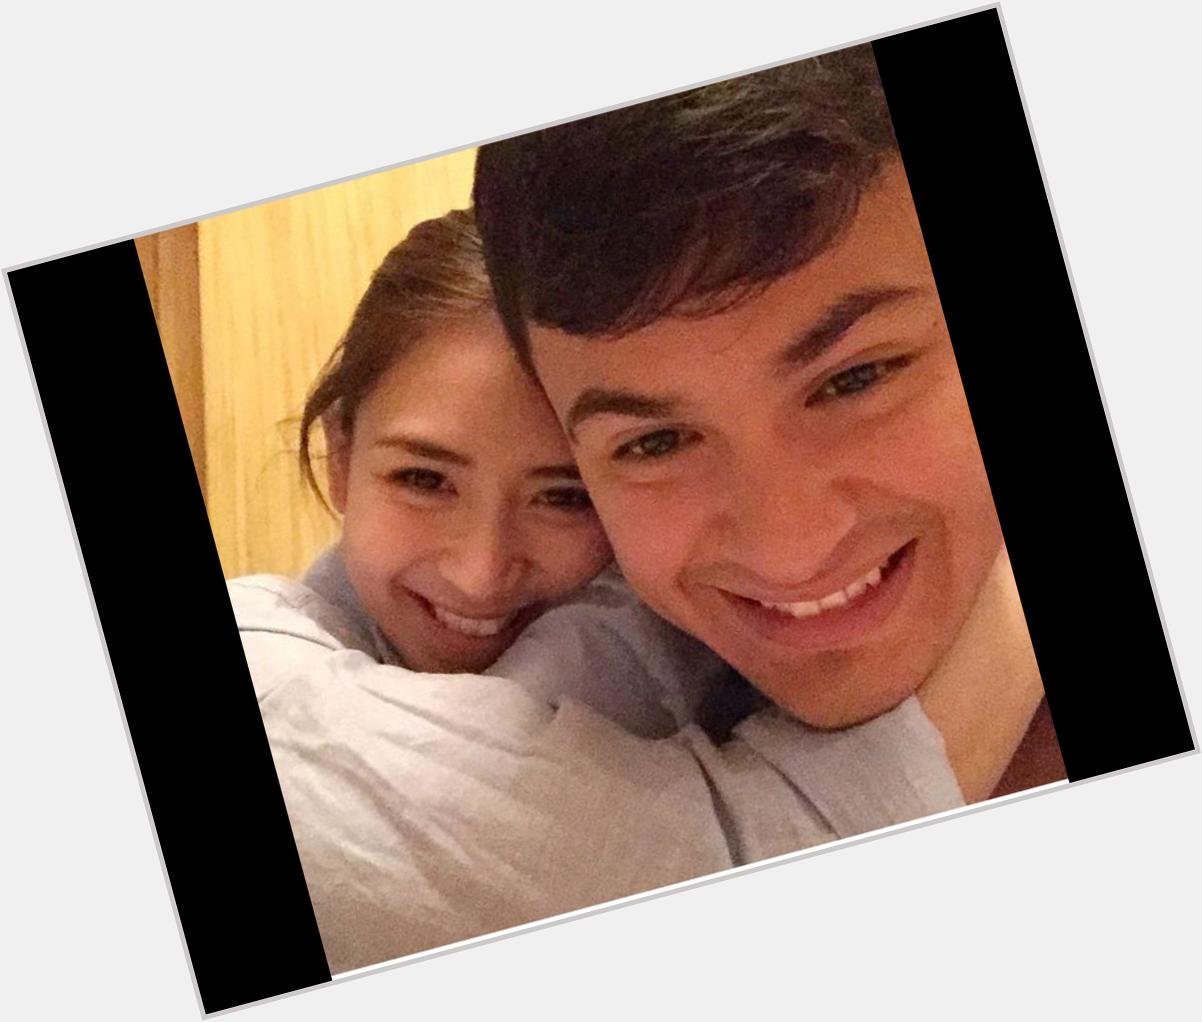 Happy Birthday Sarah Geronimo

This is it!
Matt share the Beautiful pic tonight!
They so Happy Together!
Me too! 